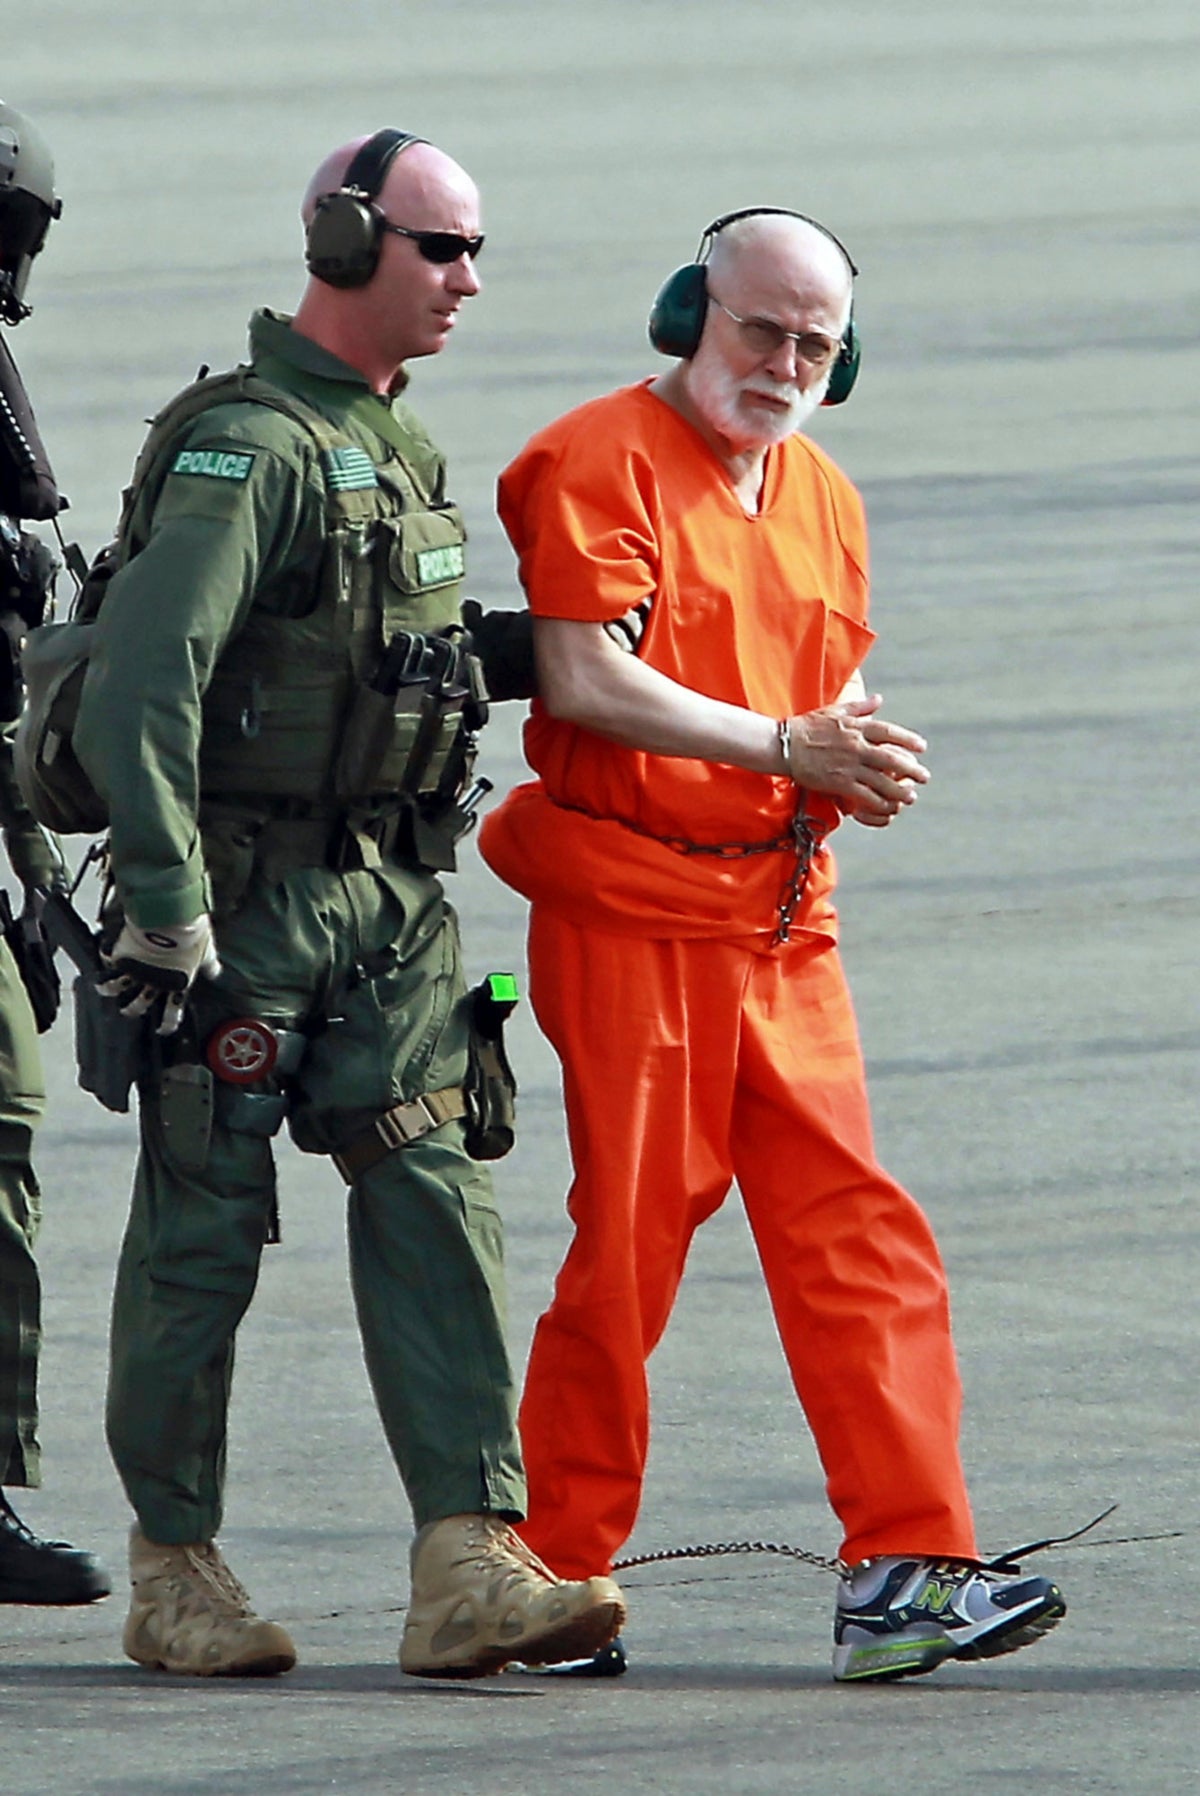 Inmate sentenced to more than 4 years in prison killing of Boston gangster James ‘Whitey’ Bulger